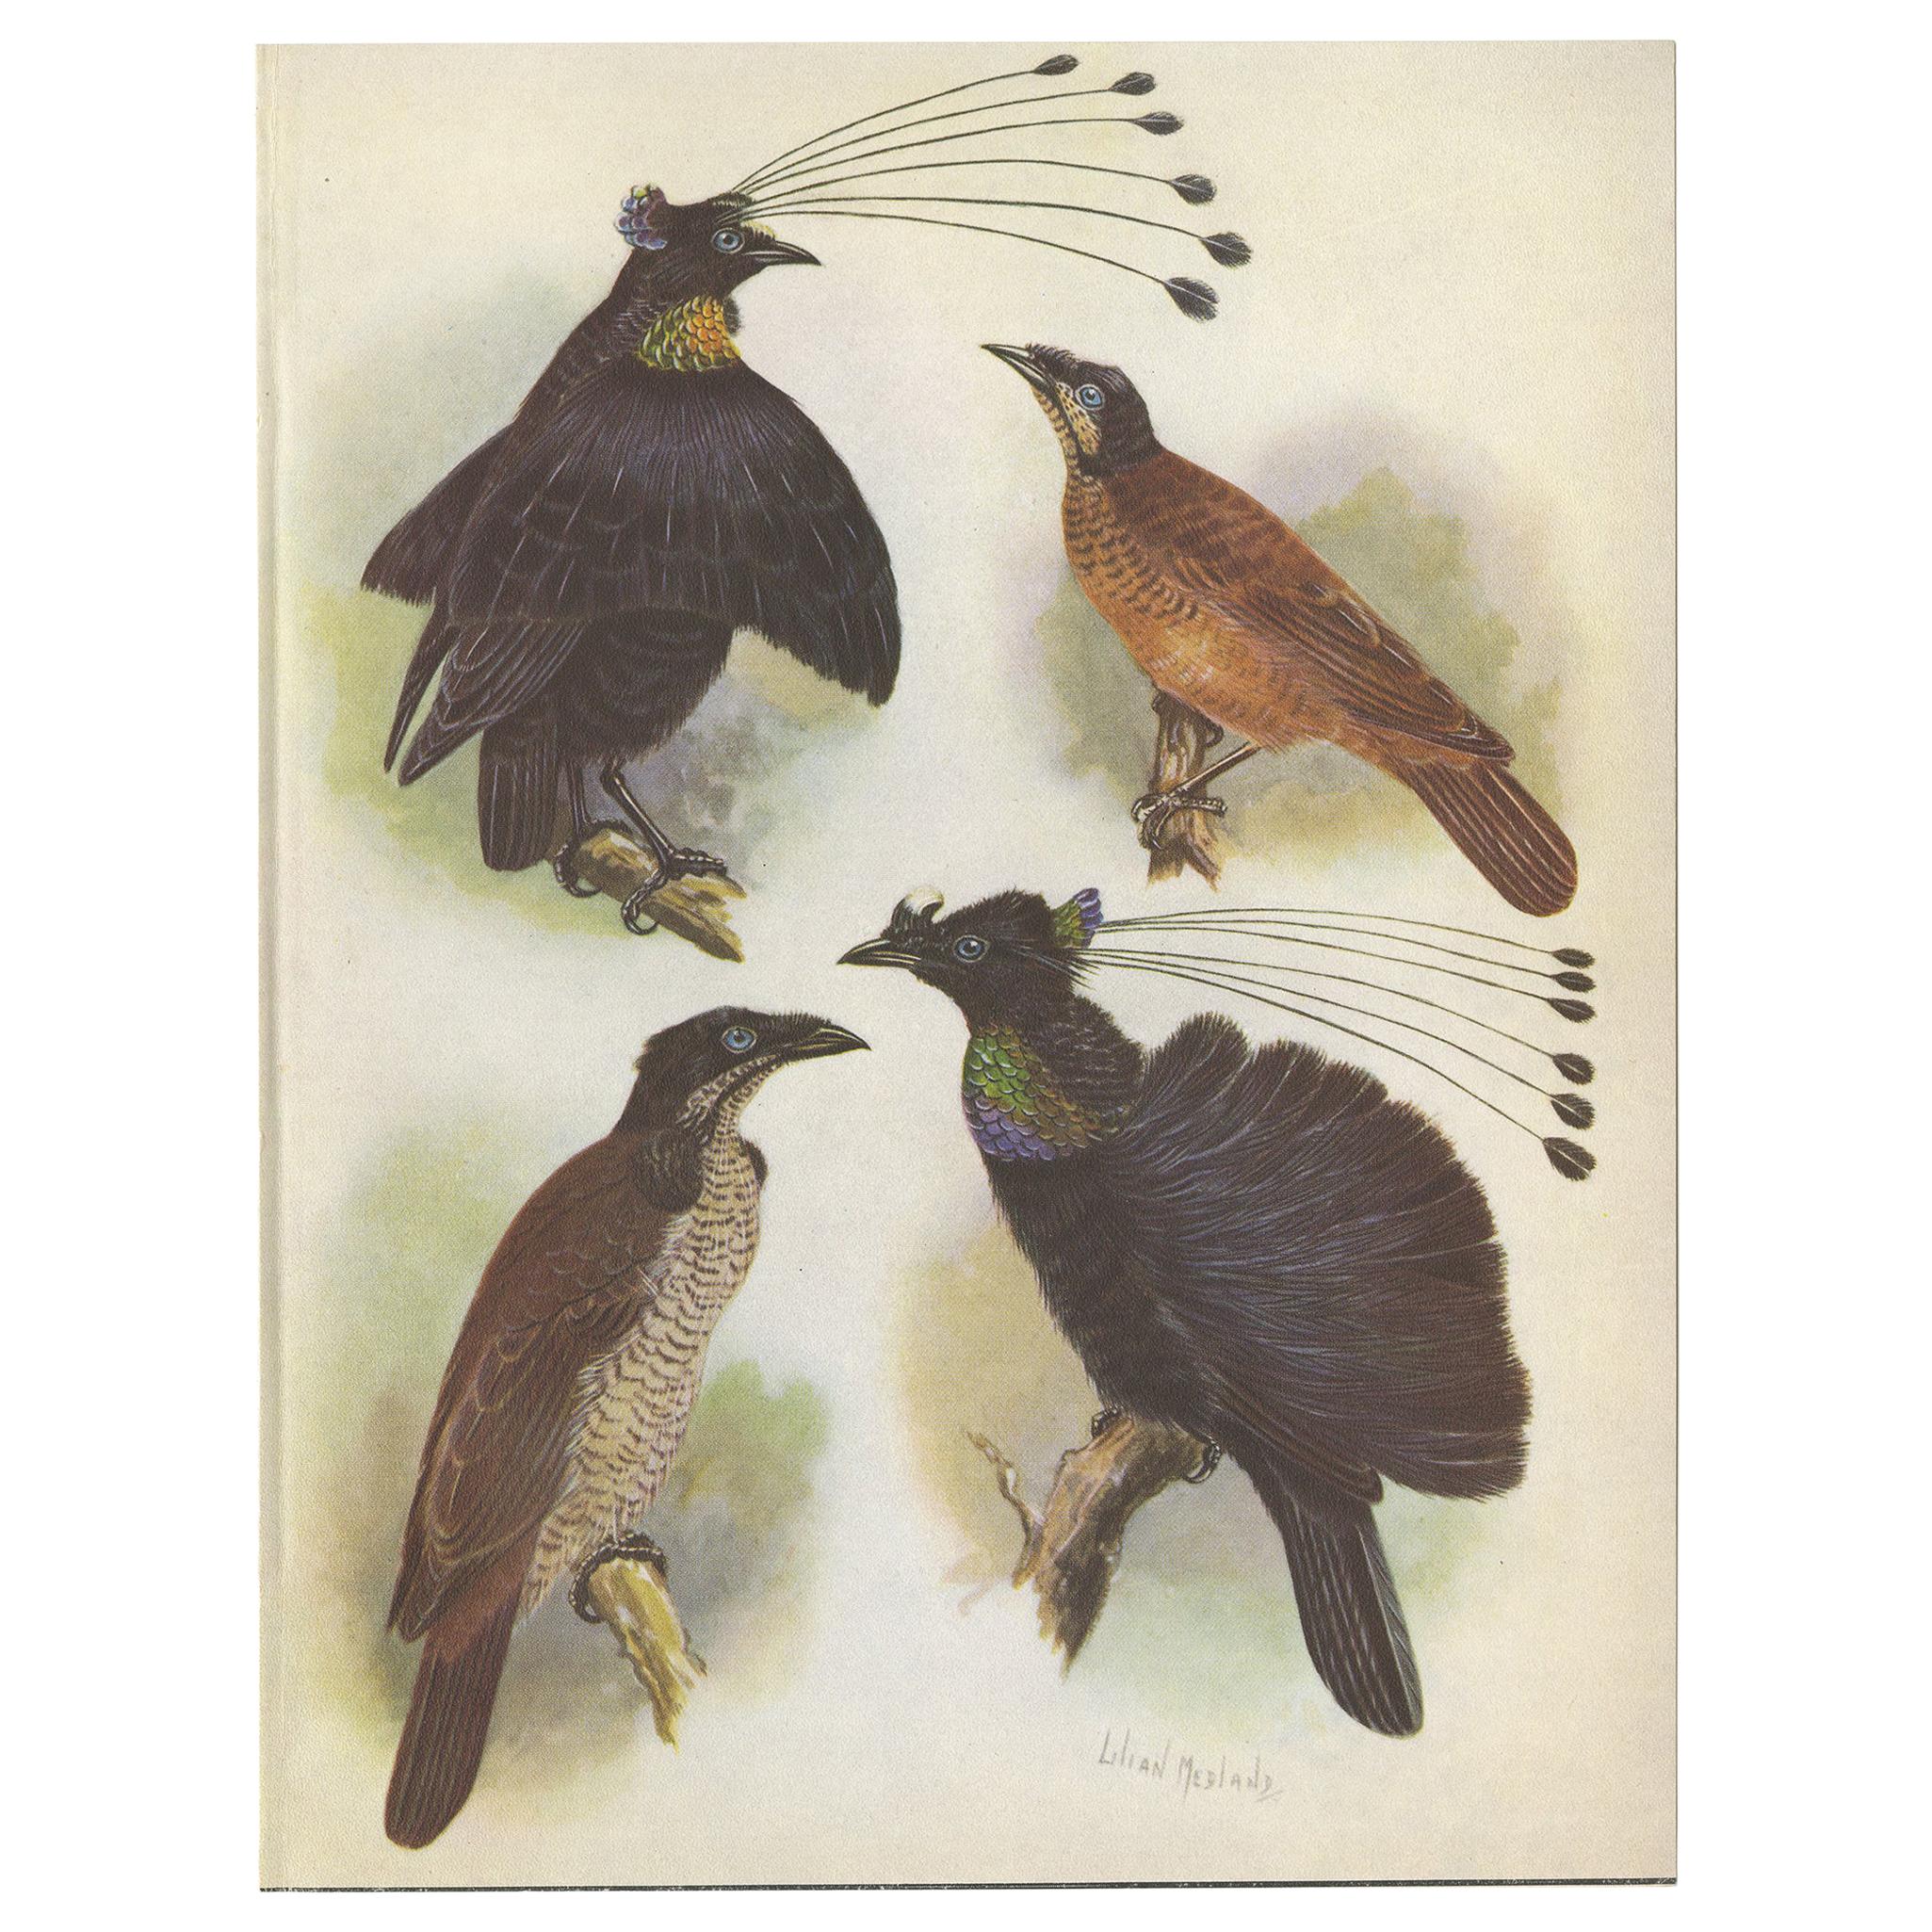 Antique Print of the Lawes Six-Plumed Bird of Paradise and Others, 1950